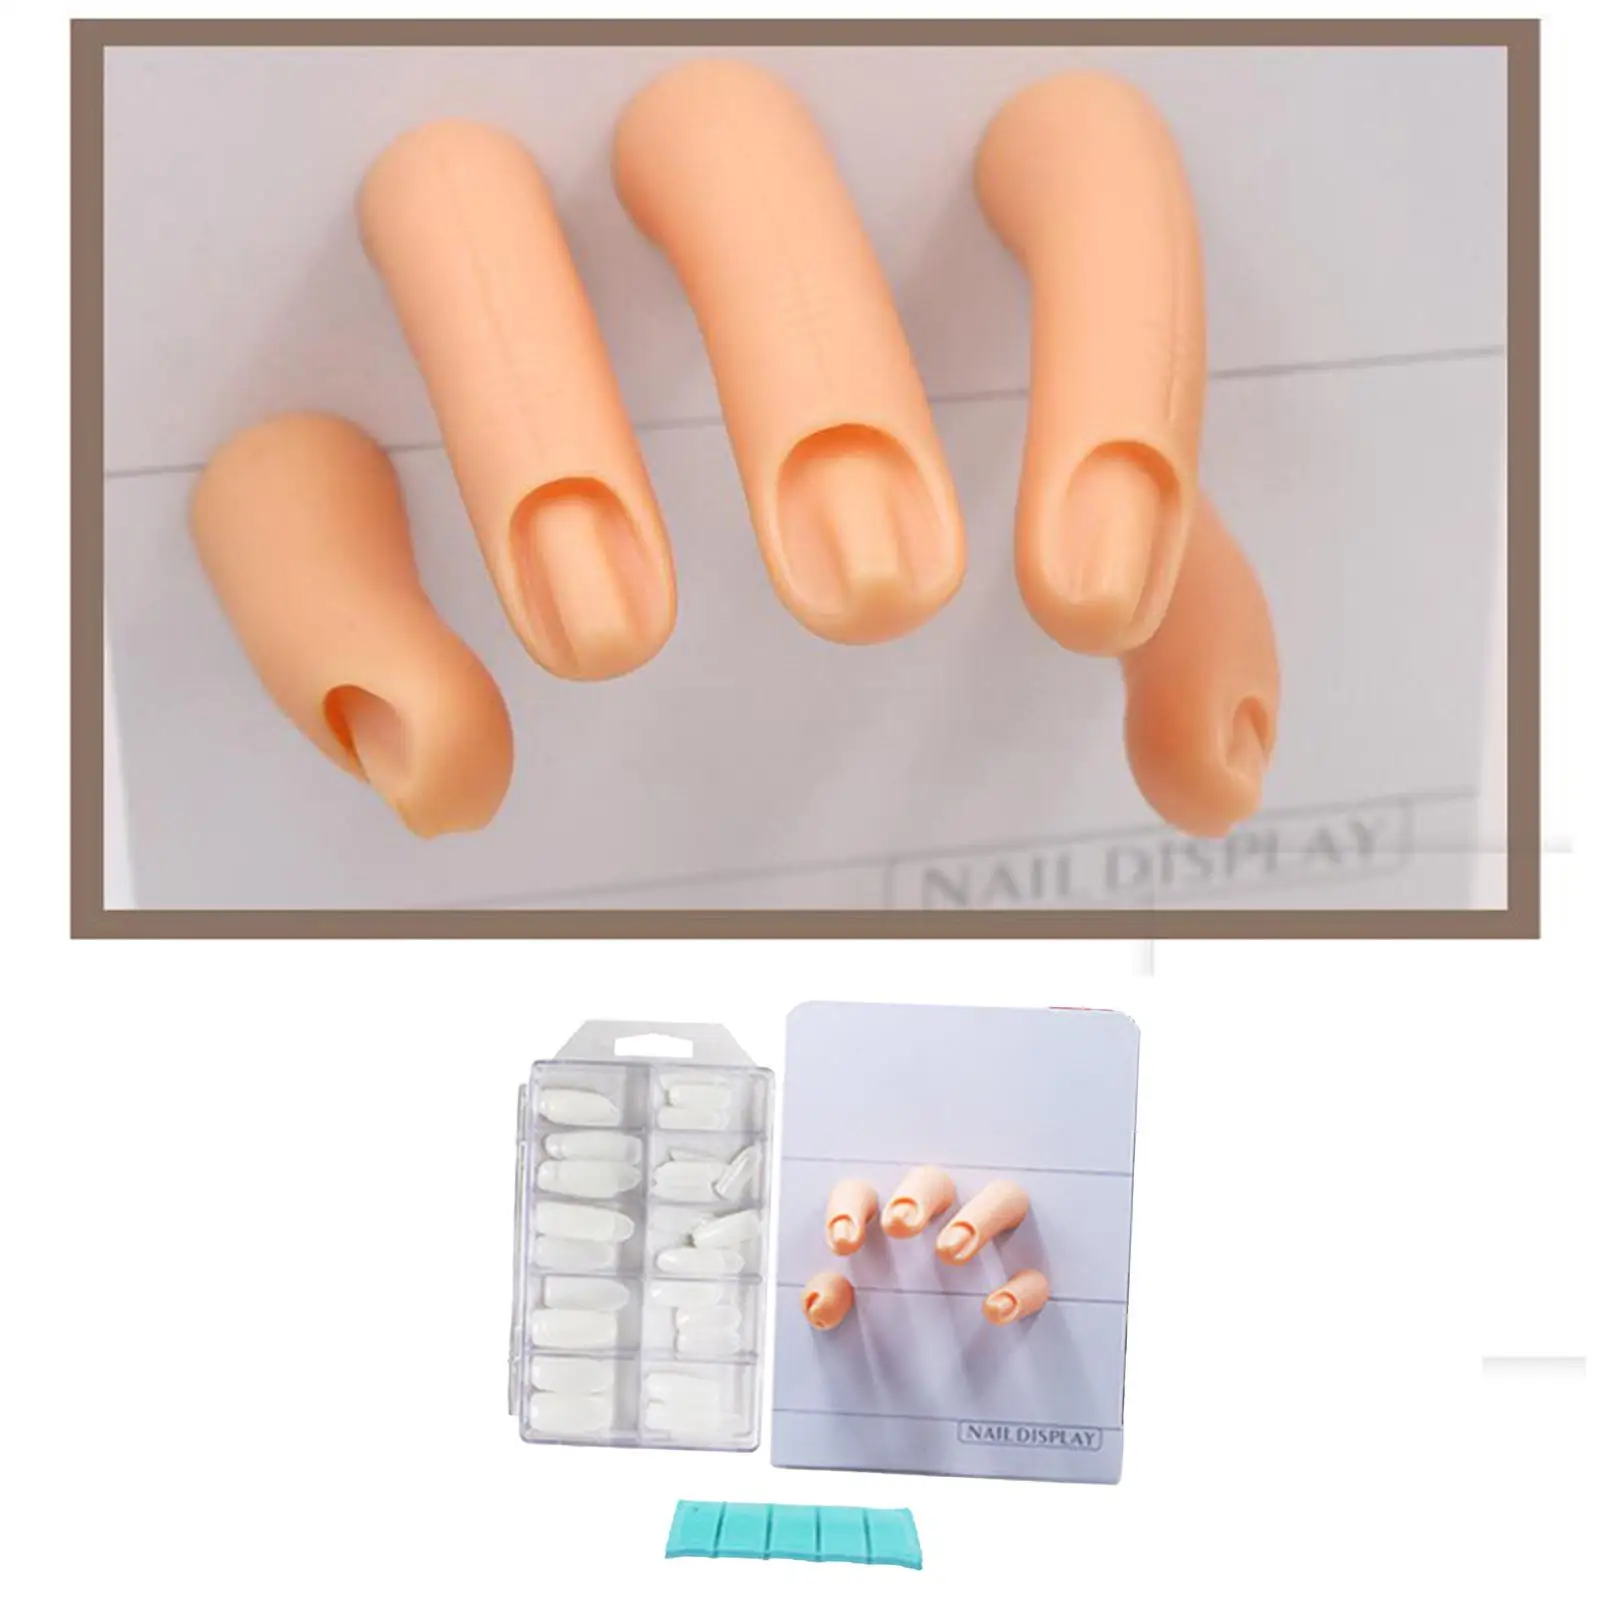  Training Tool Reusable Manicure Tools Training Hand for Nail Salon